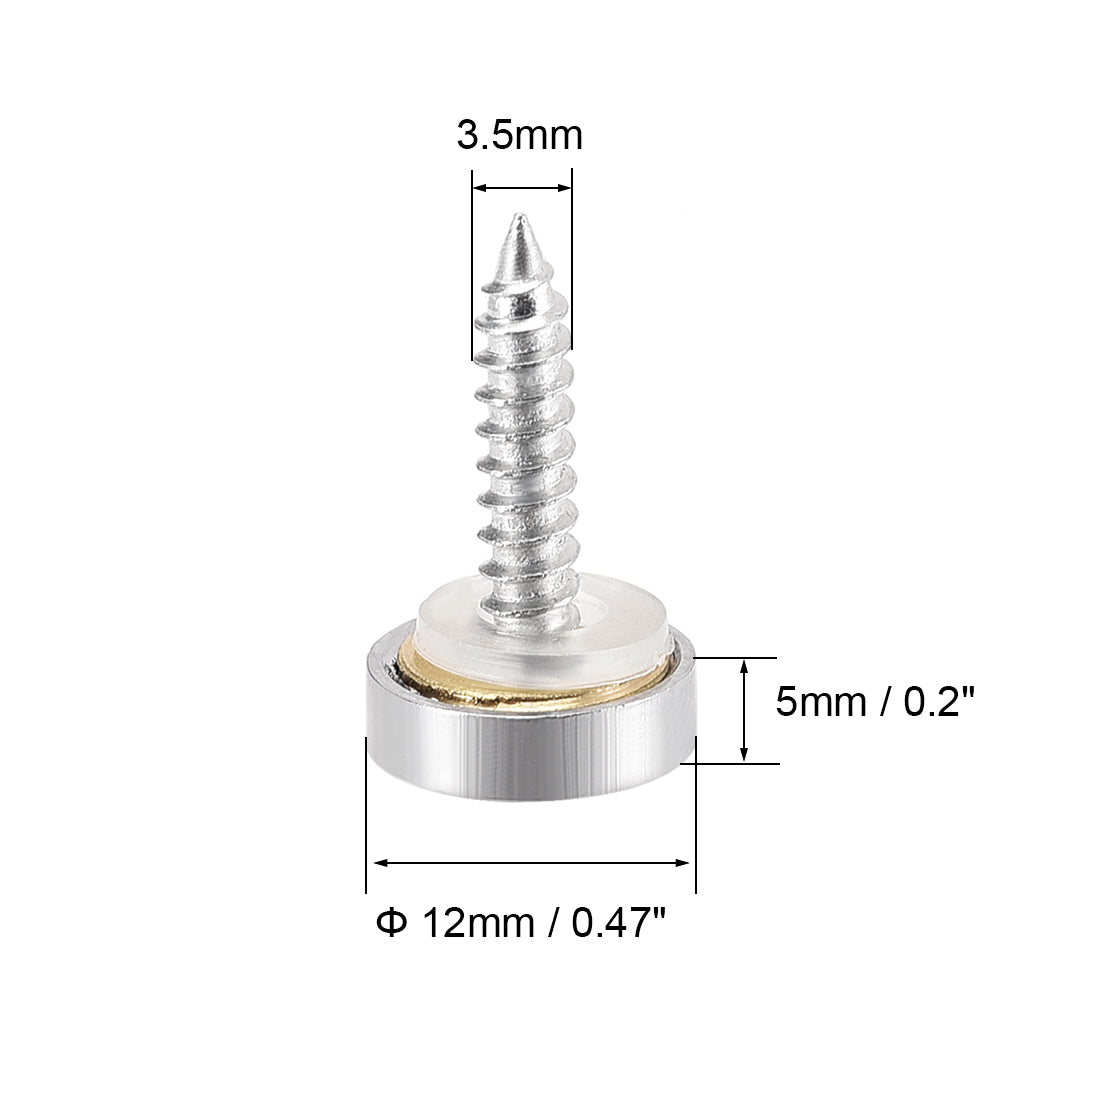 Uxcell Uxcell Mirror Screws, Decorative Cap Fasteners Cover Nails, Electroplated, Bright Silvery 14mm/0.55" Brass 16pcs